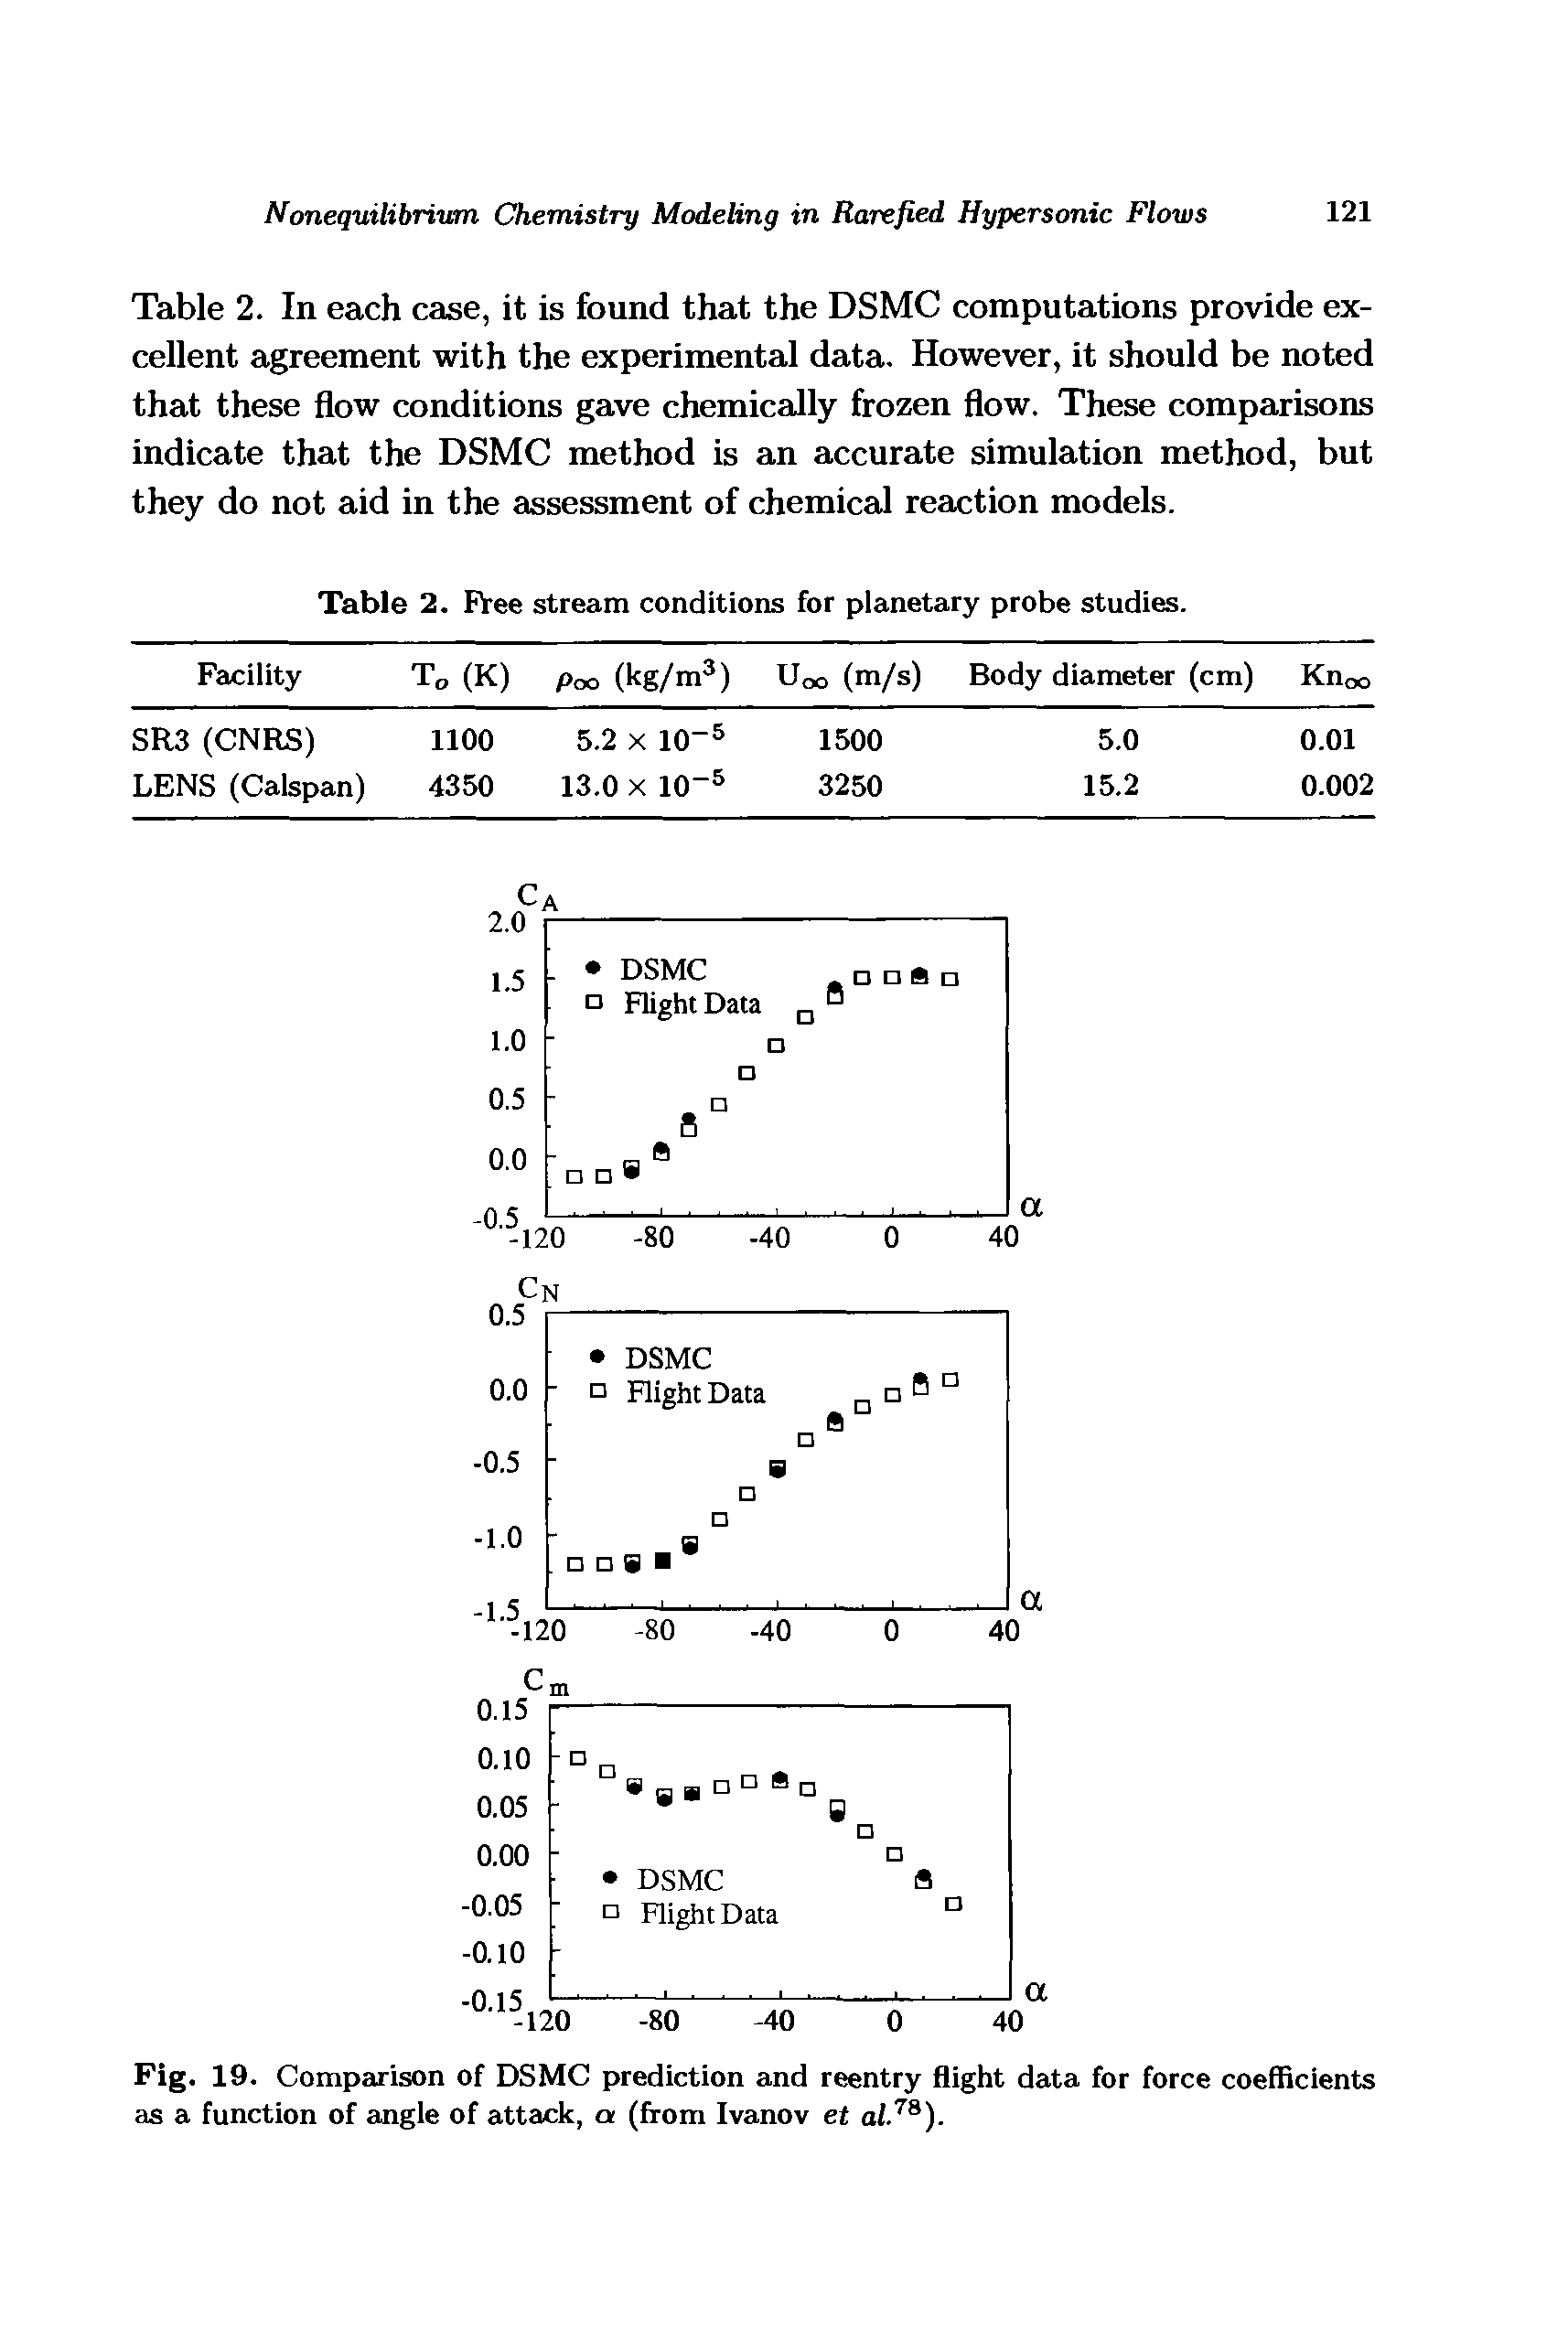 Table 2. In each case, it is found that the DSMC computations provide excellent agreement with the experimental data. However, it should be noted that these flow conditions gave chemically frozen flow. These comparisons indicate that the DSMC method is an accurate simulation method, but they do not aid in the assessment of chemical reaction models.